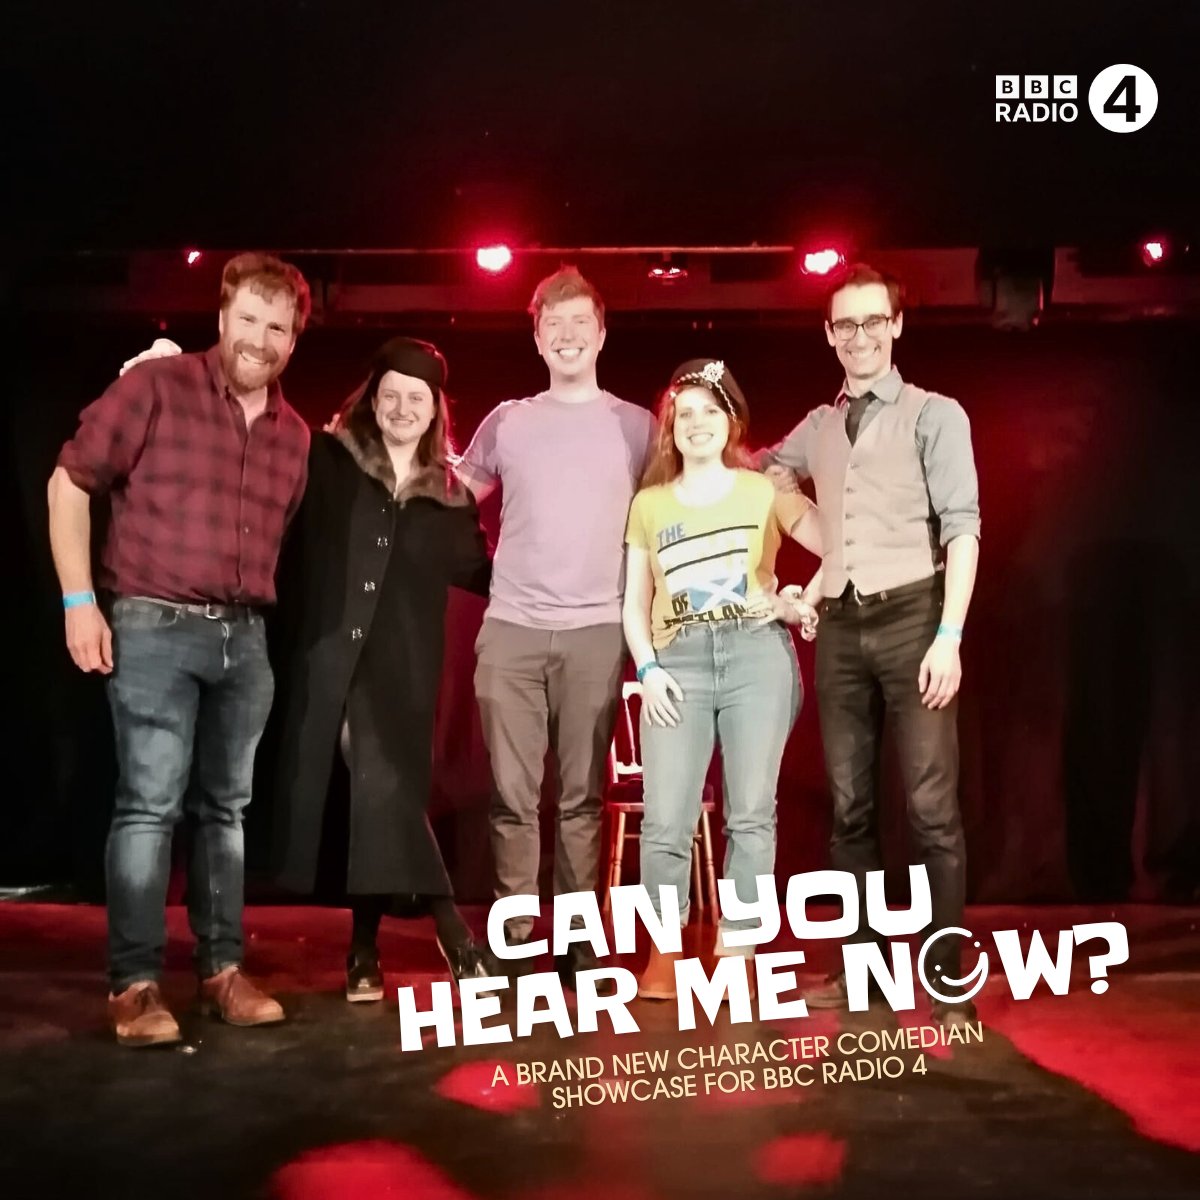 ‘Can You Hear Me Now?’ airs SUNDAY 7.15pm @BBCRadio4 a character comedy showcase featuring some of the best new character performers on the circuit, and what a line up we have for our pilot show! @lornlornlors @BigDirtyFry @EleanorMorton @mc_hammersmith & host @standupfarmer 👍